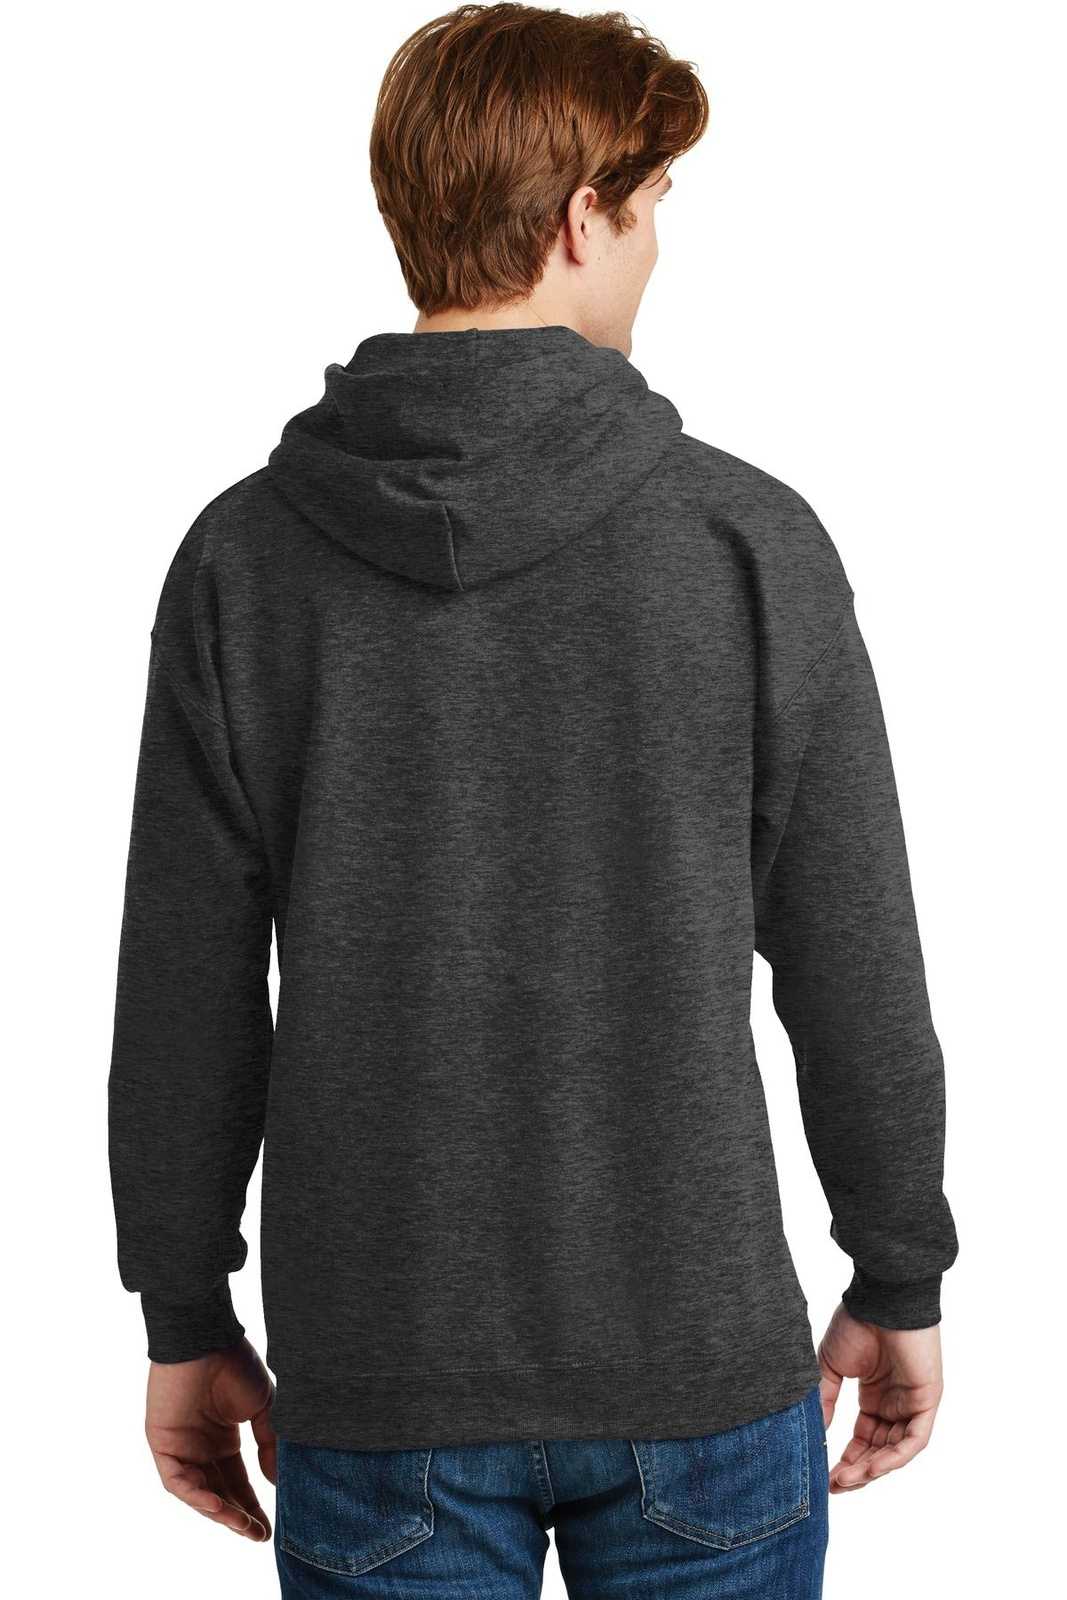 Hanes F170 Ultimate Cotton Pullover Hooded Sweatshirt - Charcoal Heather - HIT a Double